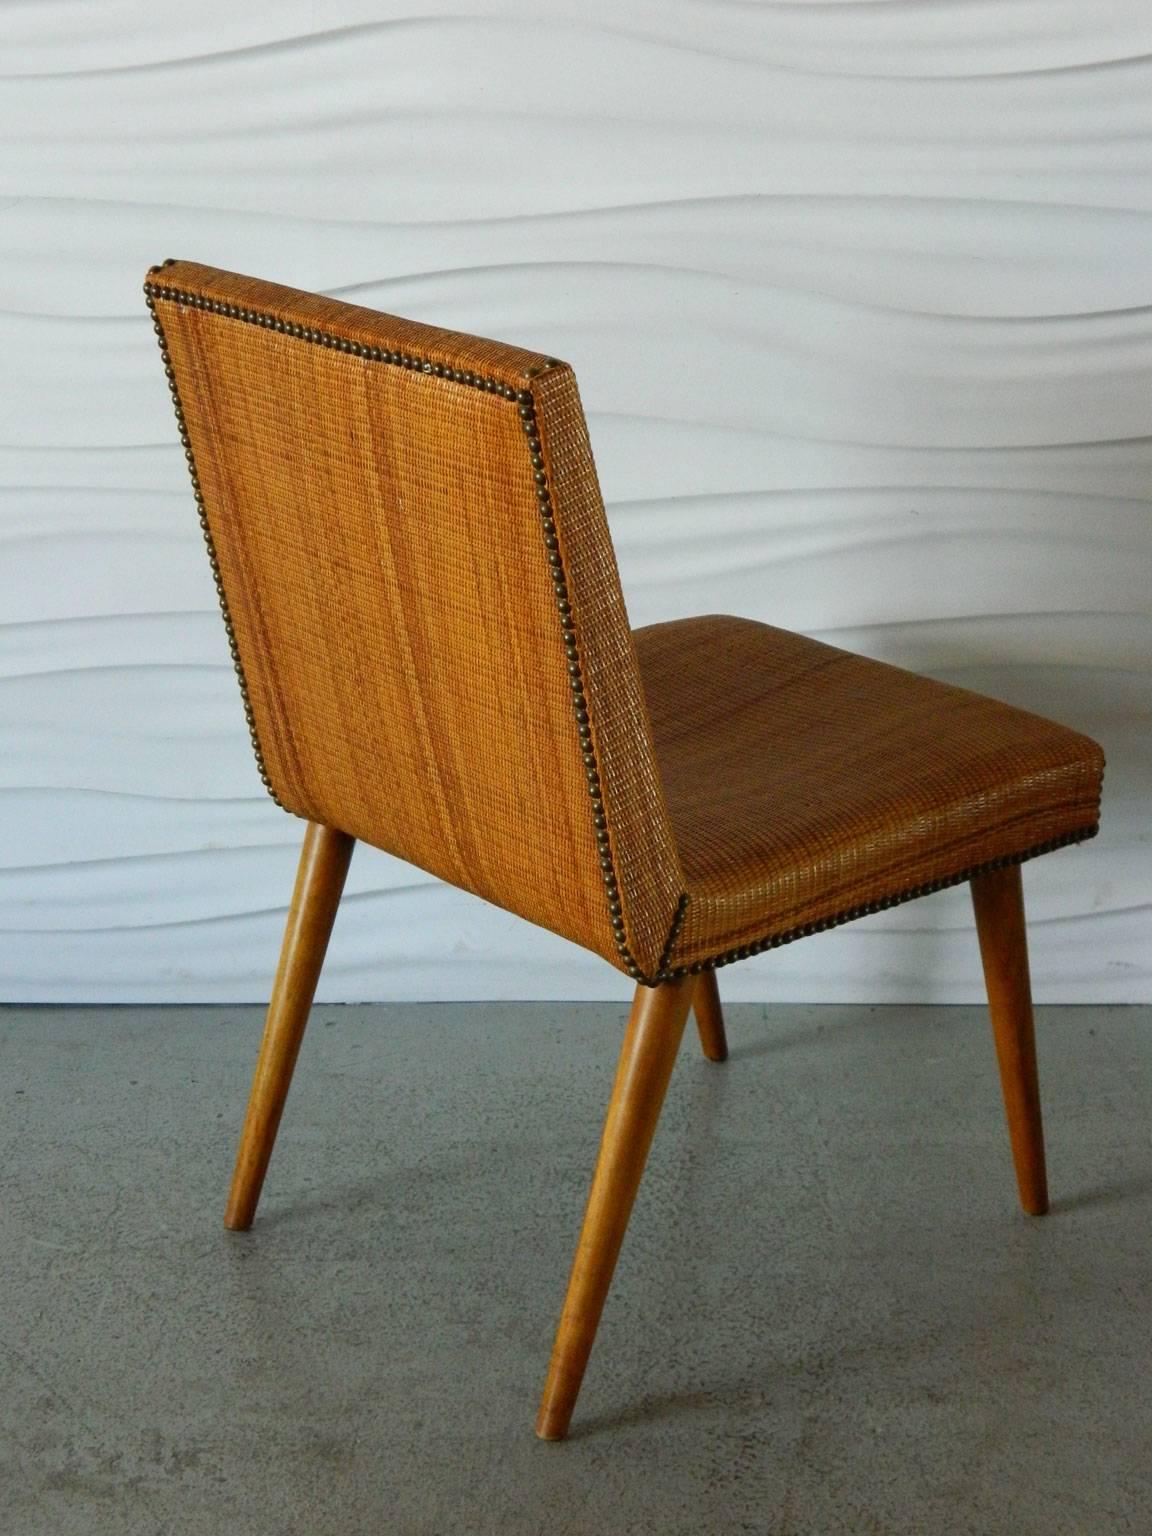 This stylish cane-covered chair by T.H. Robsjohn-Gibbings for Widdicomb has brass nailhead details.